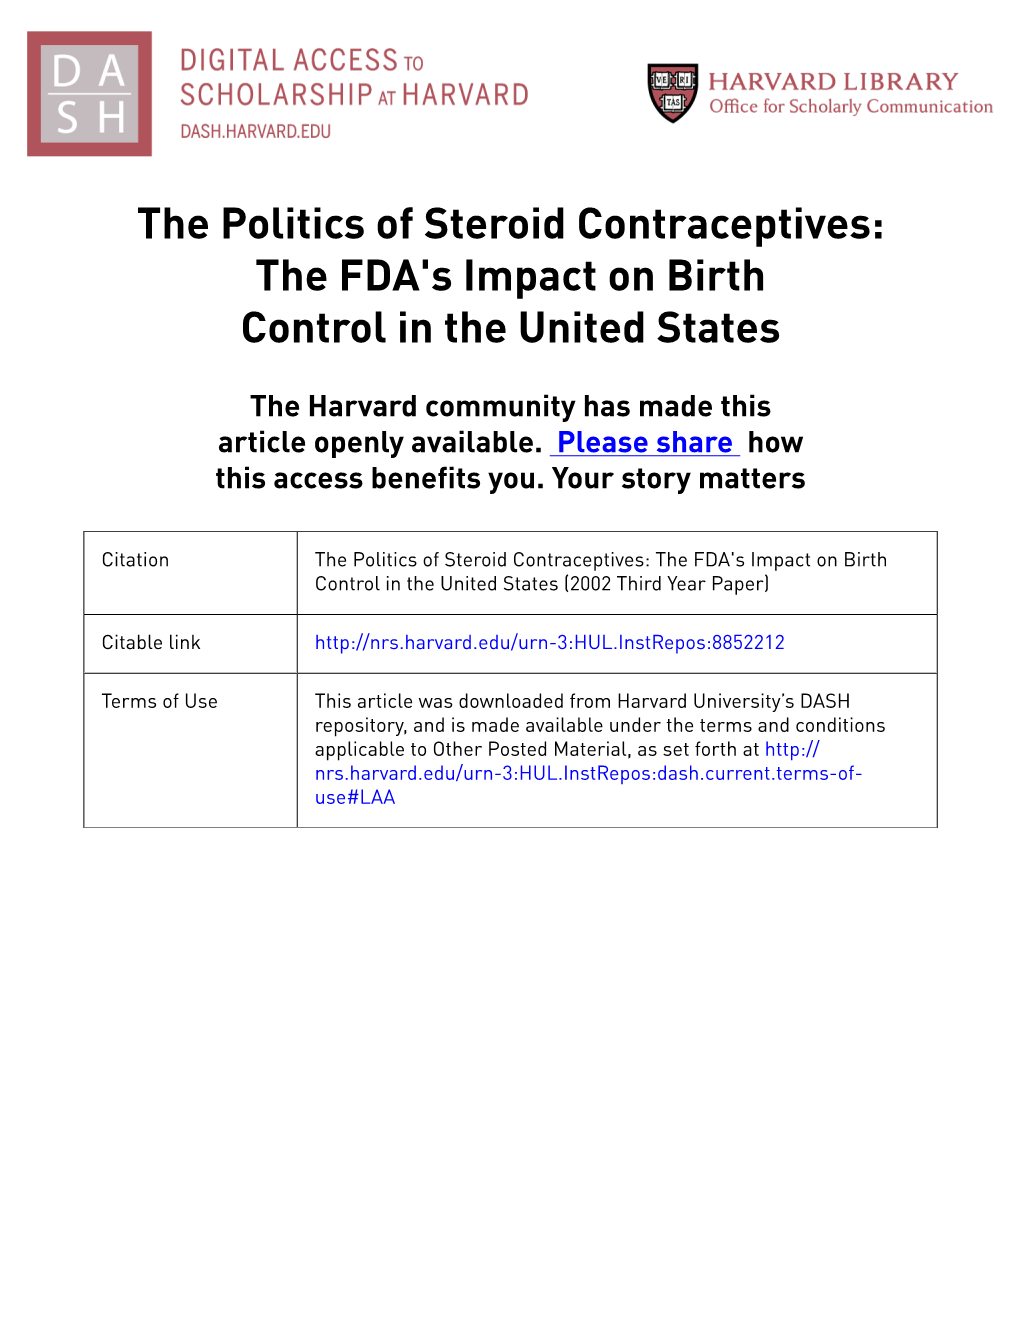 The Politics of Steroid Contraceptives: the FDA's Impact on Birth Control in the United States